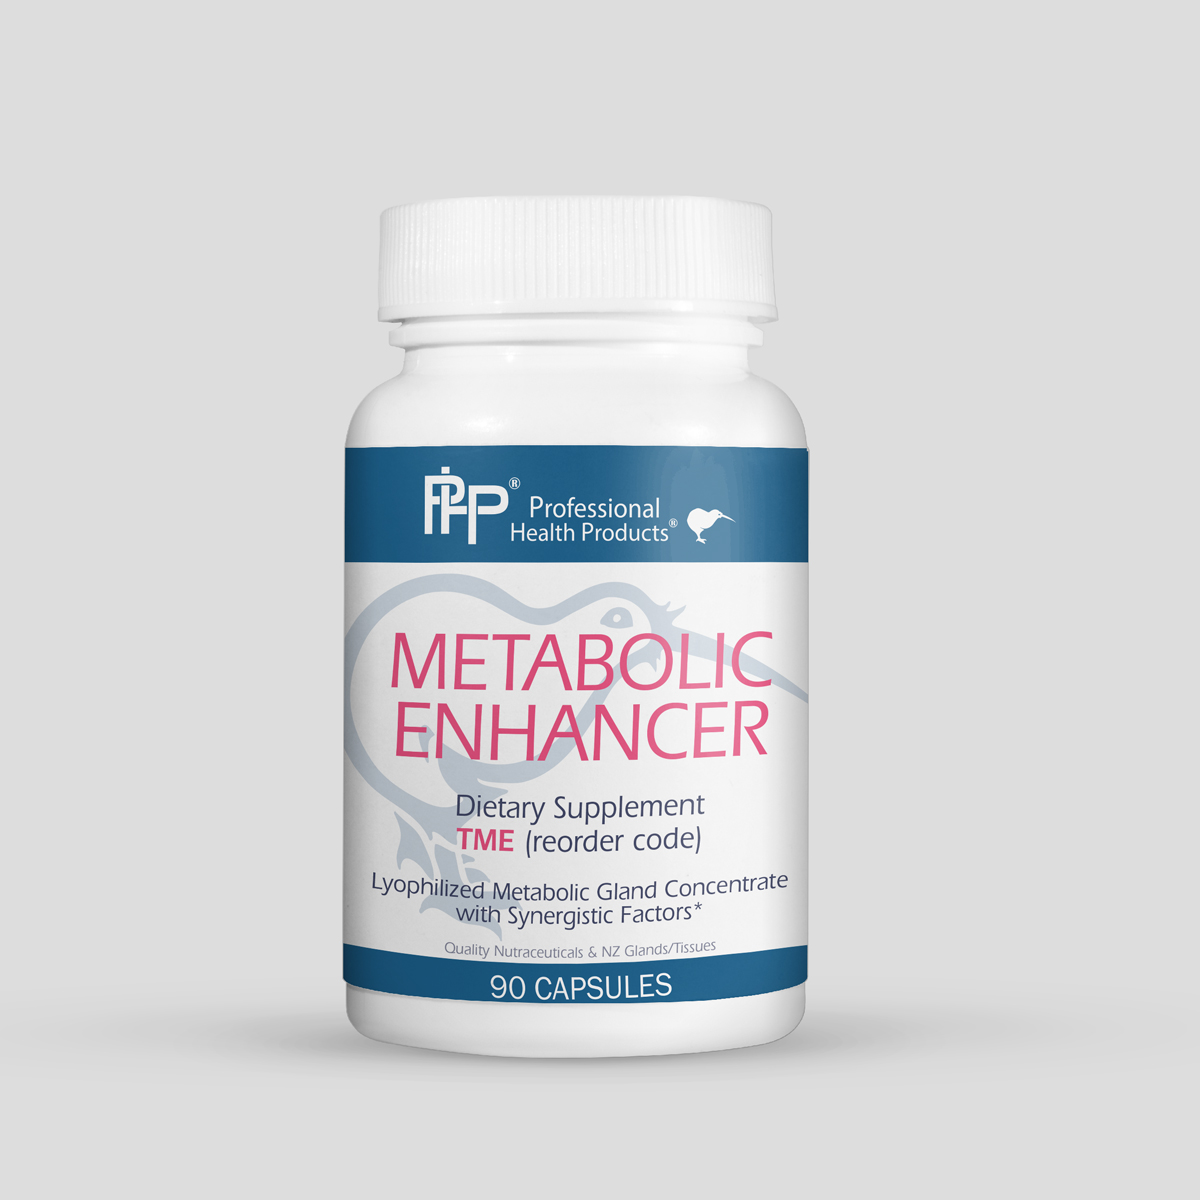 Herbal metabolic enhancer with no artificial ingredients